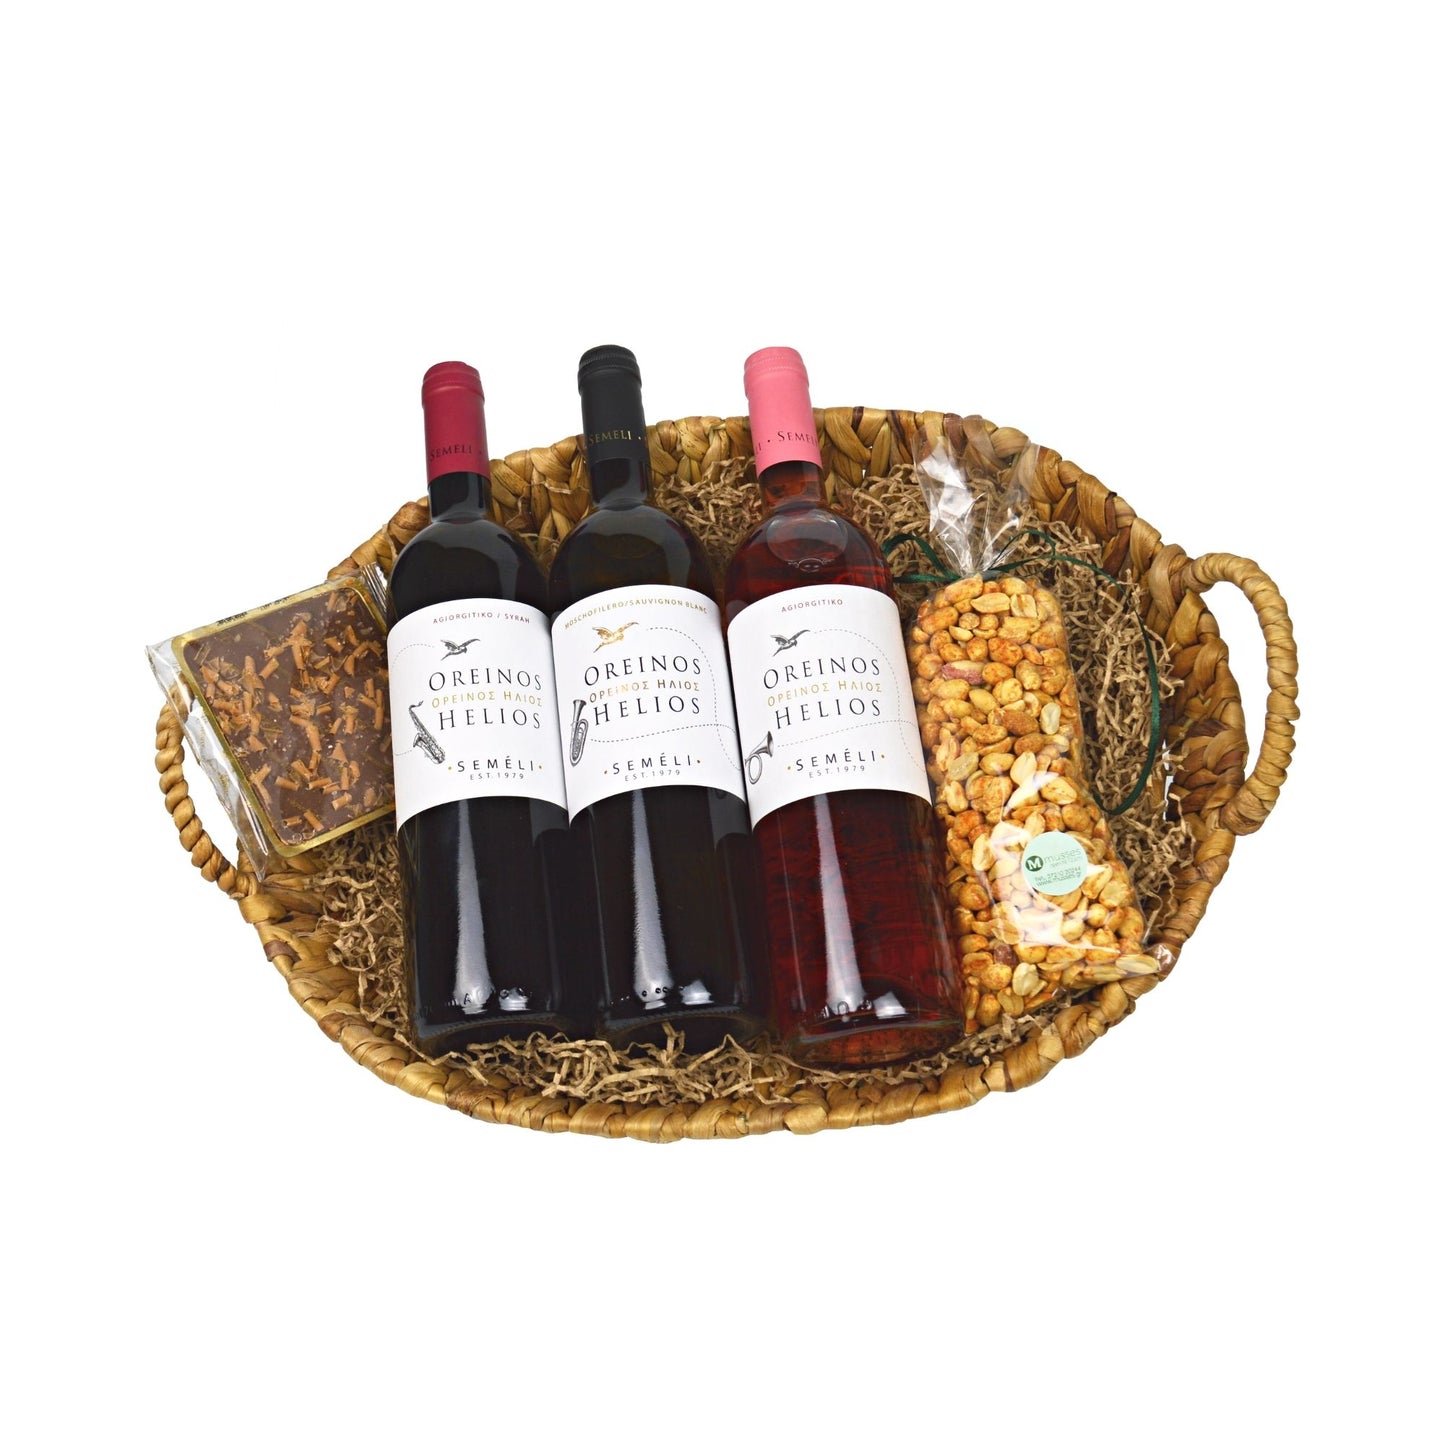 BASKET WITH 3 SEMELI WINES DRIED FRUITS &amp; CHOCOLATE